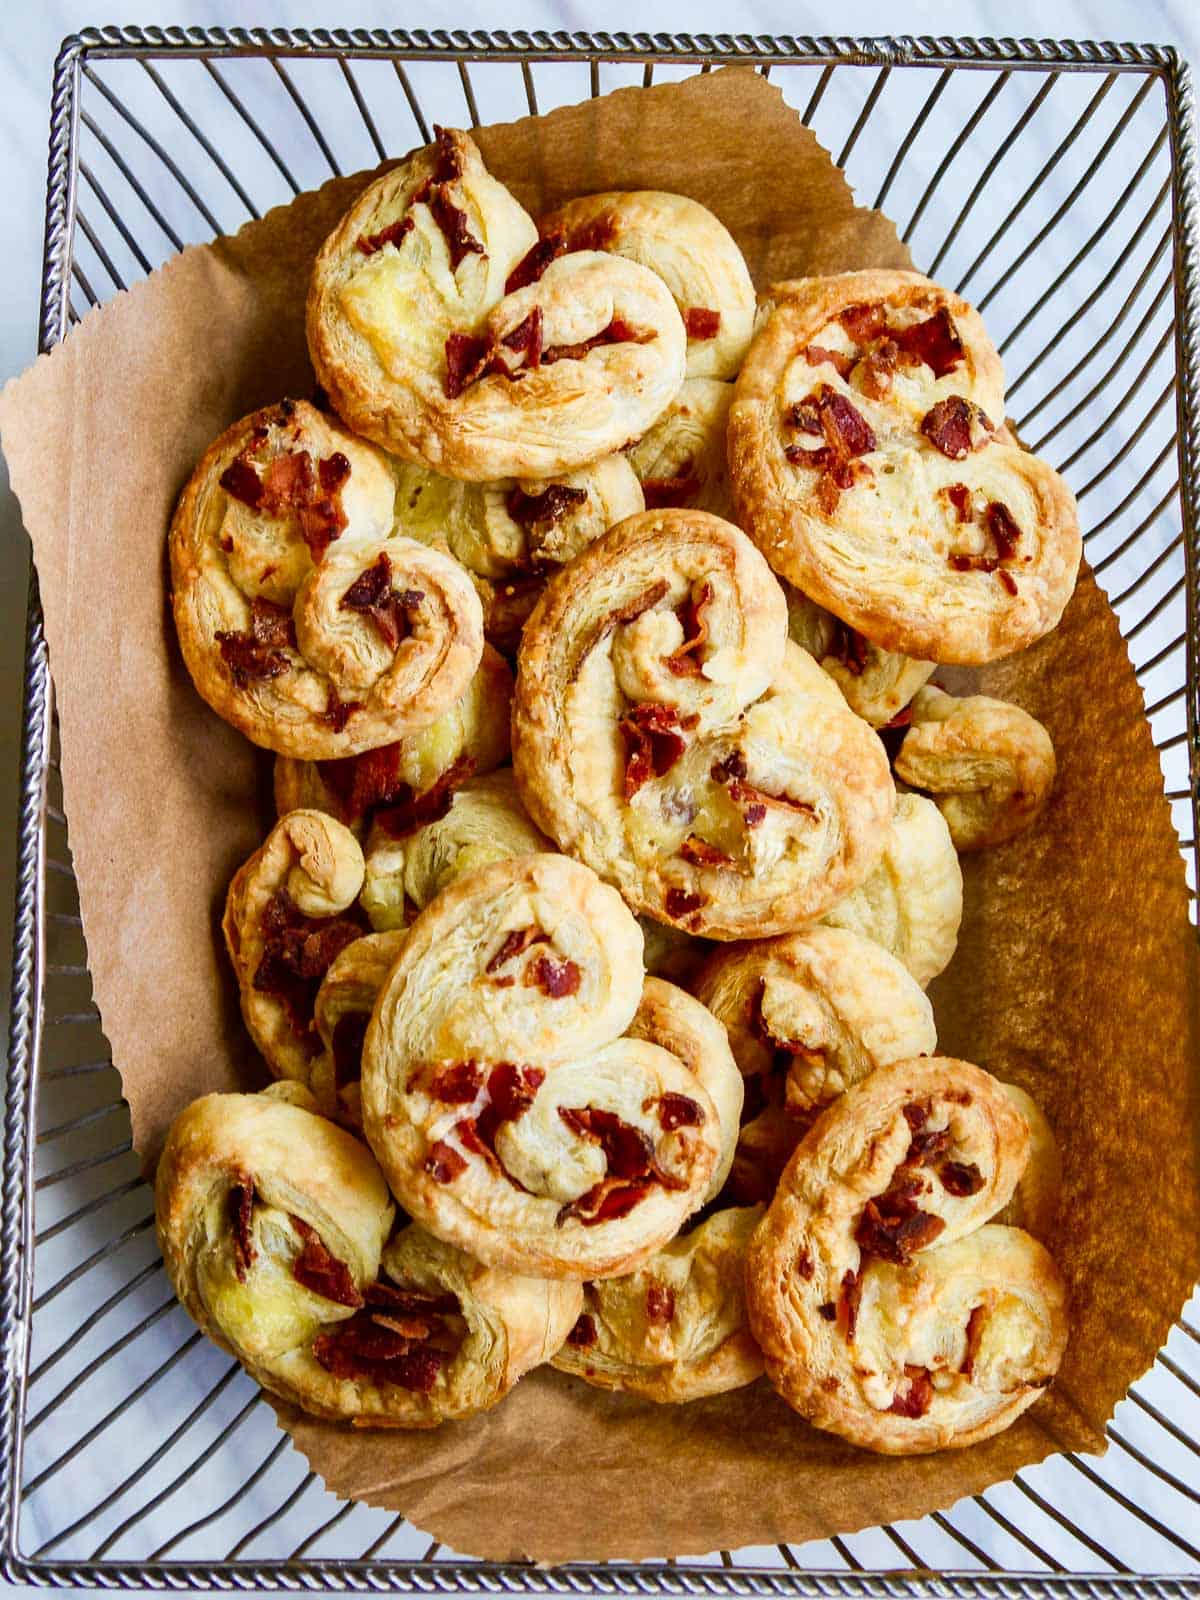 A vintage silver basket lined with brown parchment paper and filled with brie and bacon palmiers freshly baked from the oven.